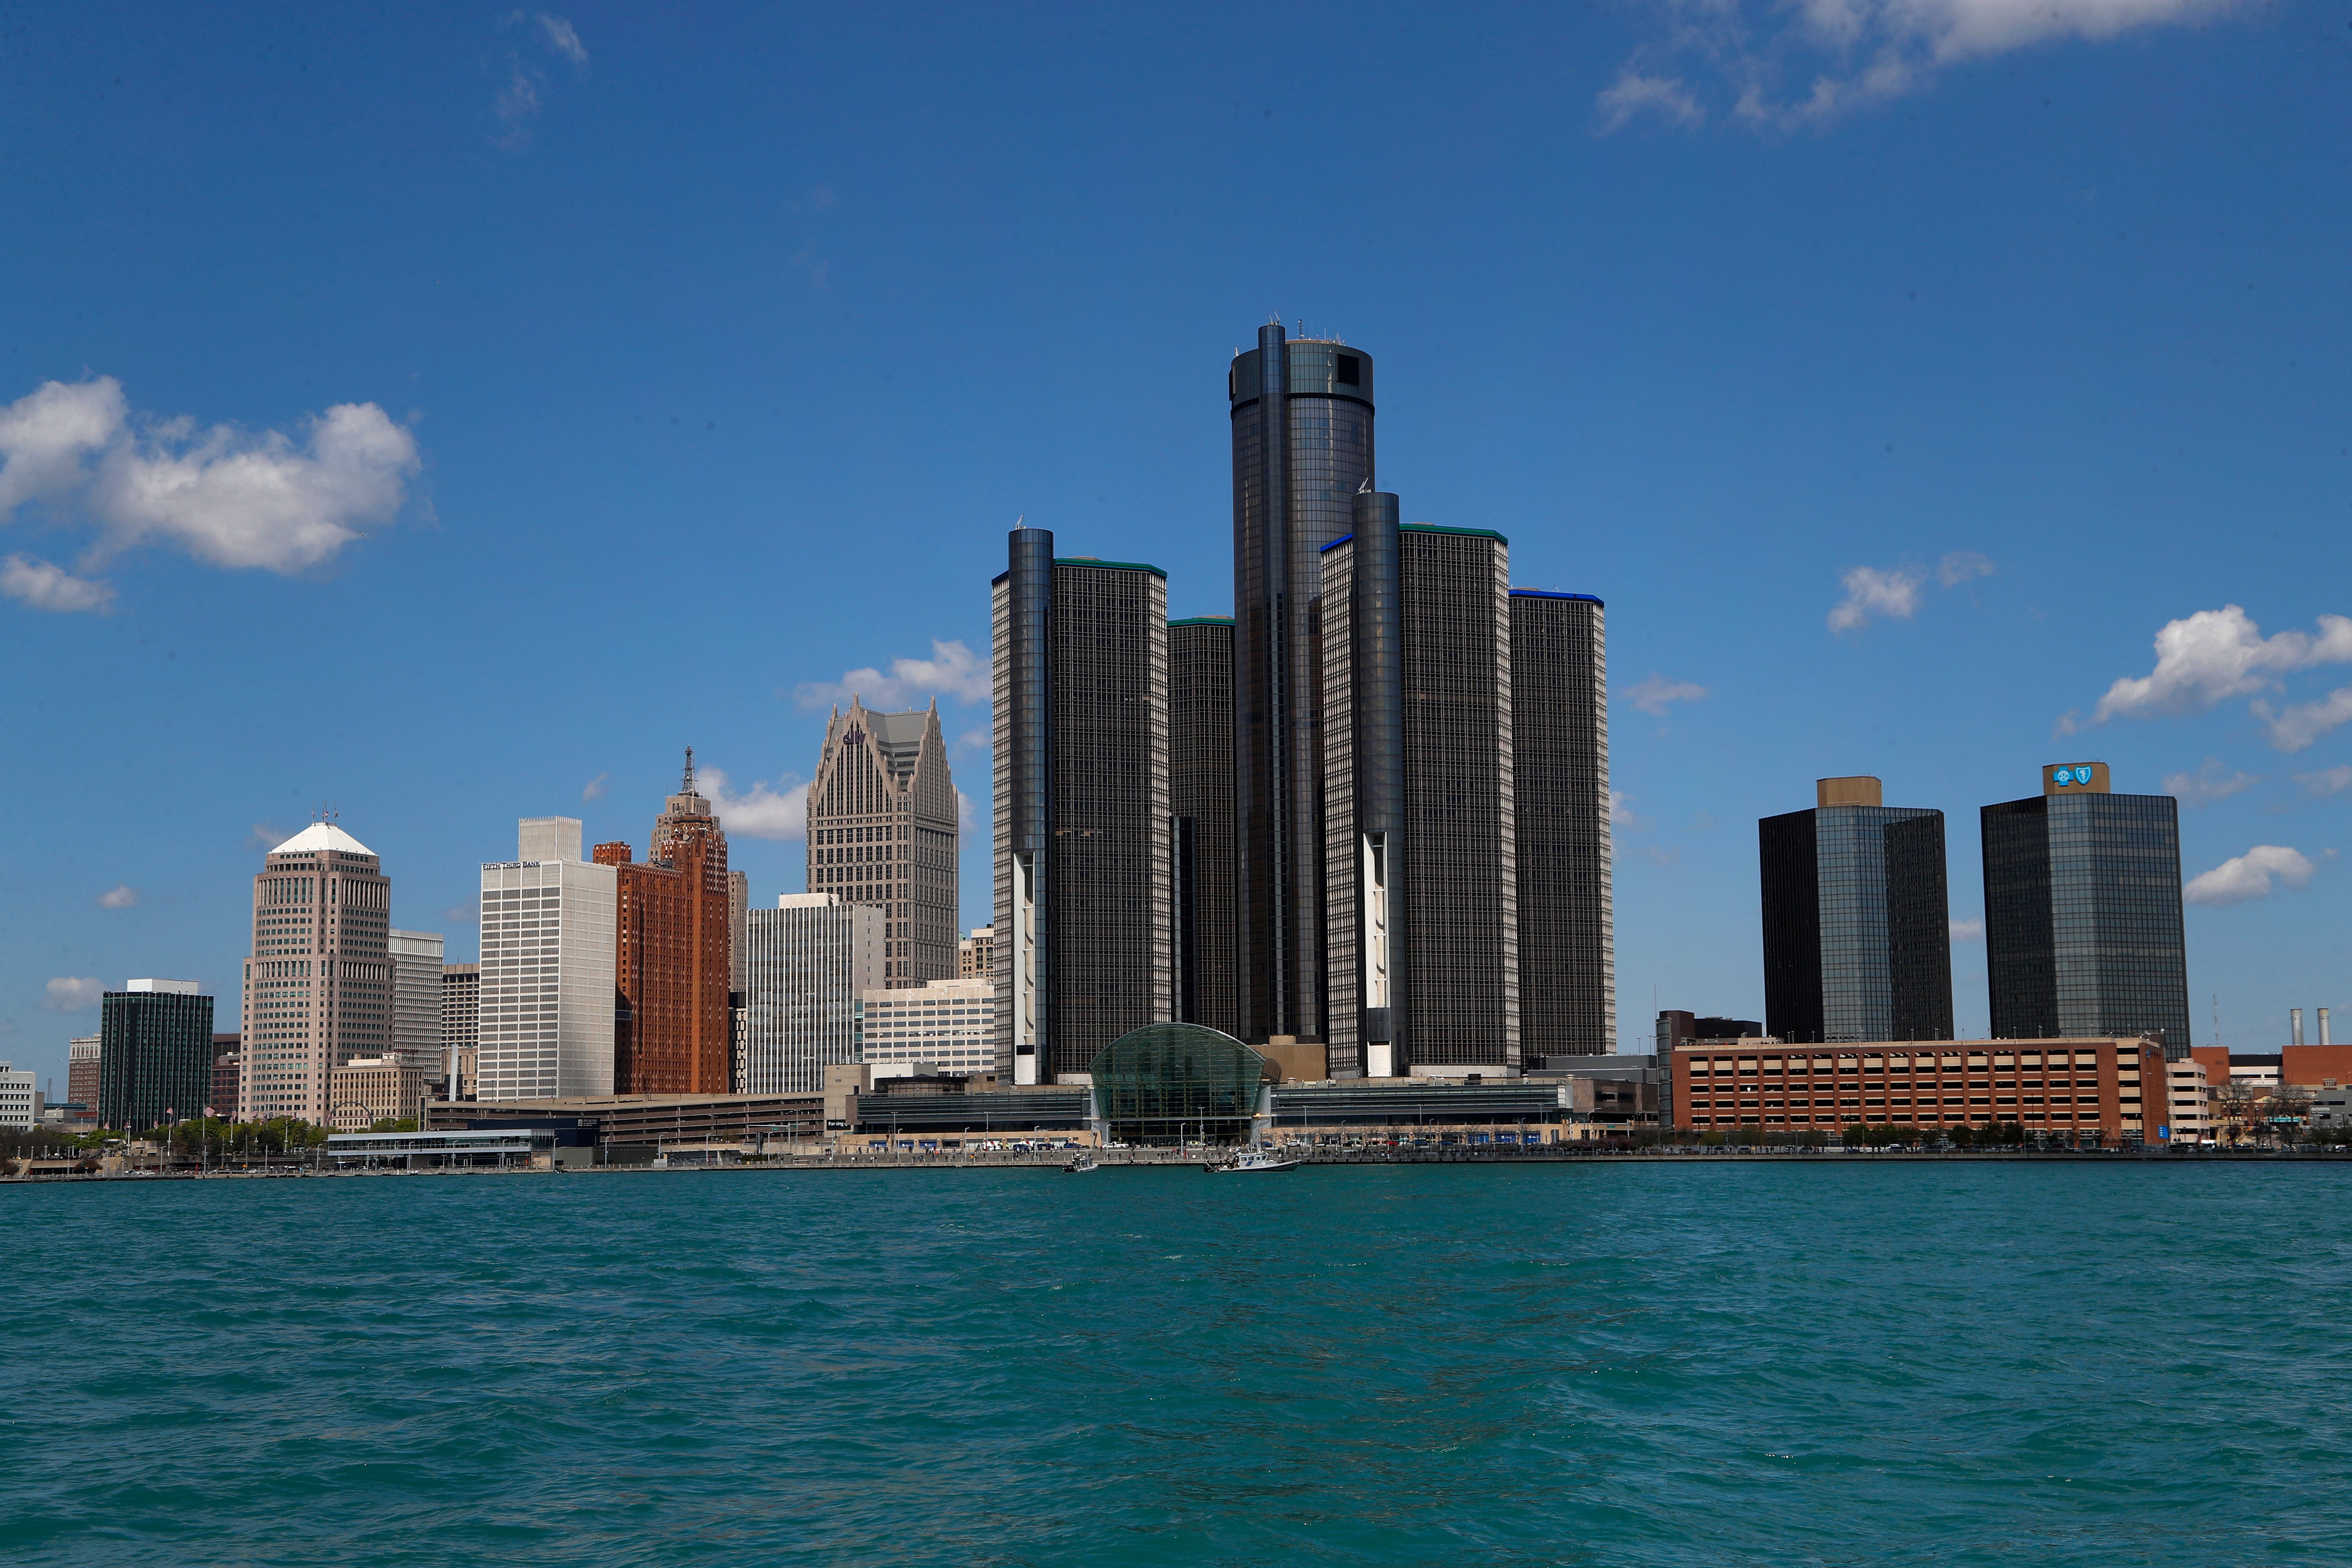 The Detroit skyline pictured on a clear day